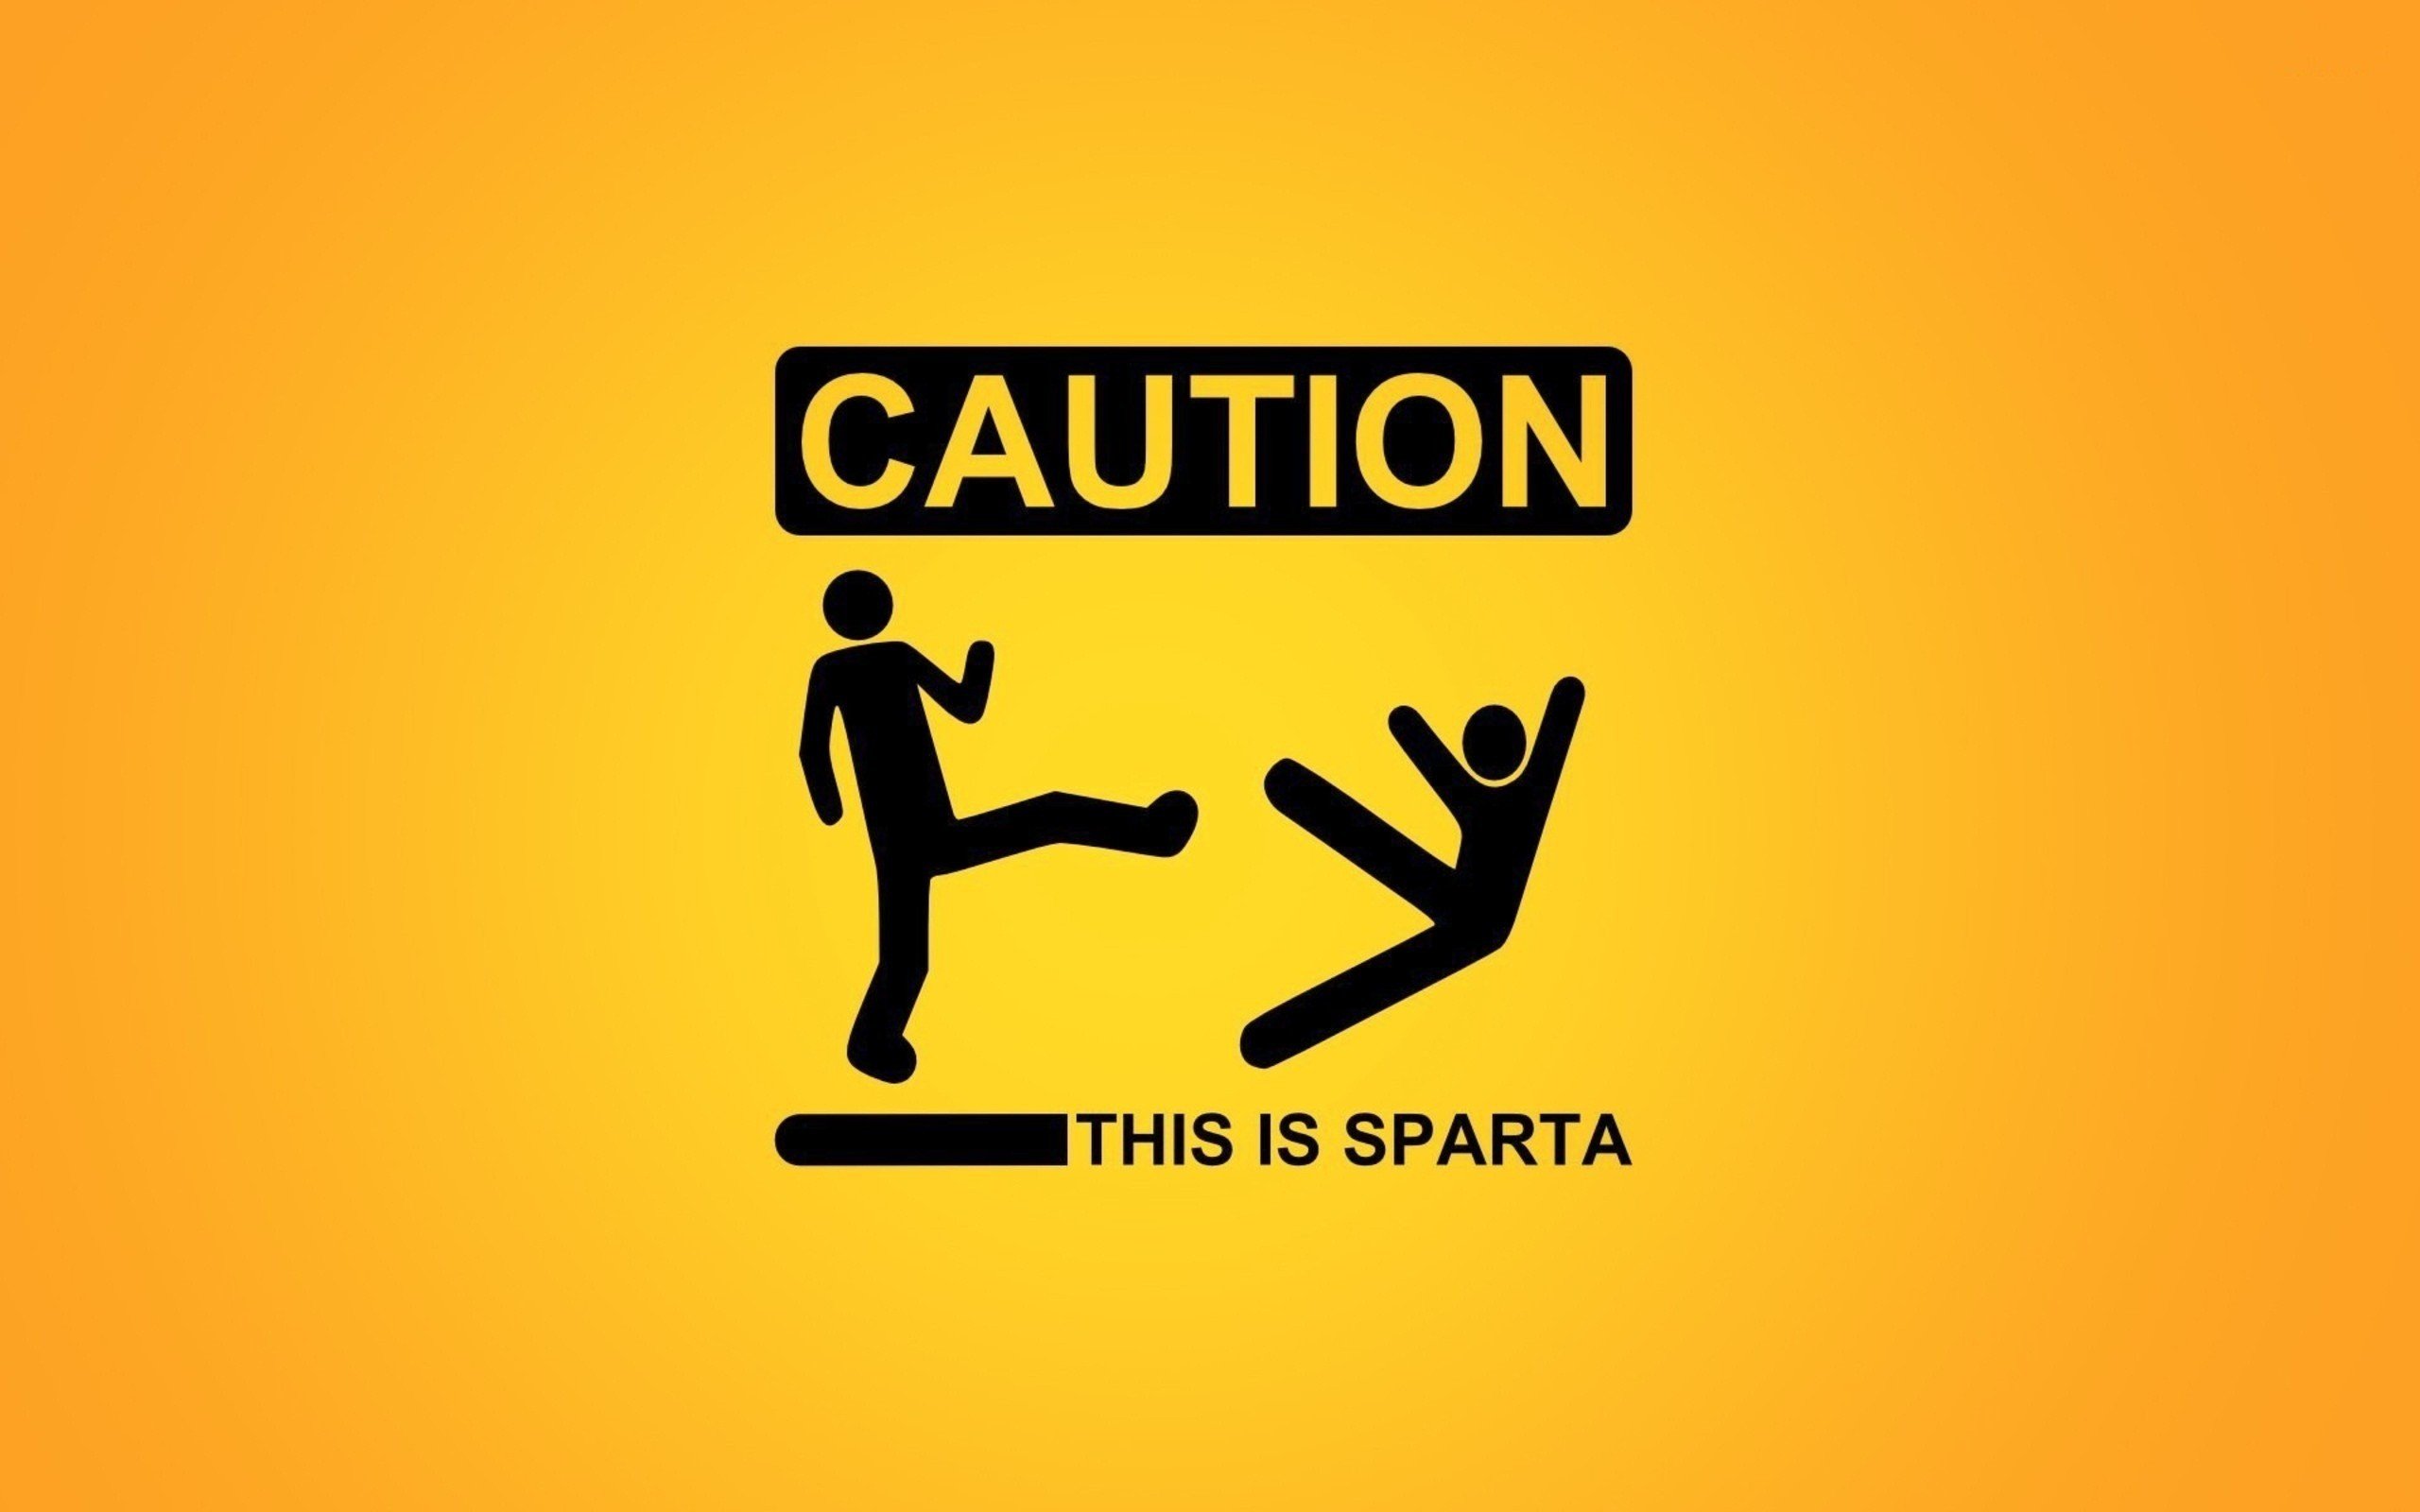 minimalistic, Sparta, Signs, Funny, Warning, Caution, Stick, Figures, Simple, Yellow, Background, Kicking Wallpaper